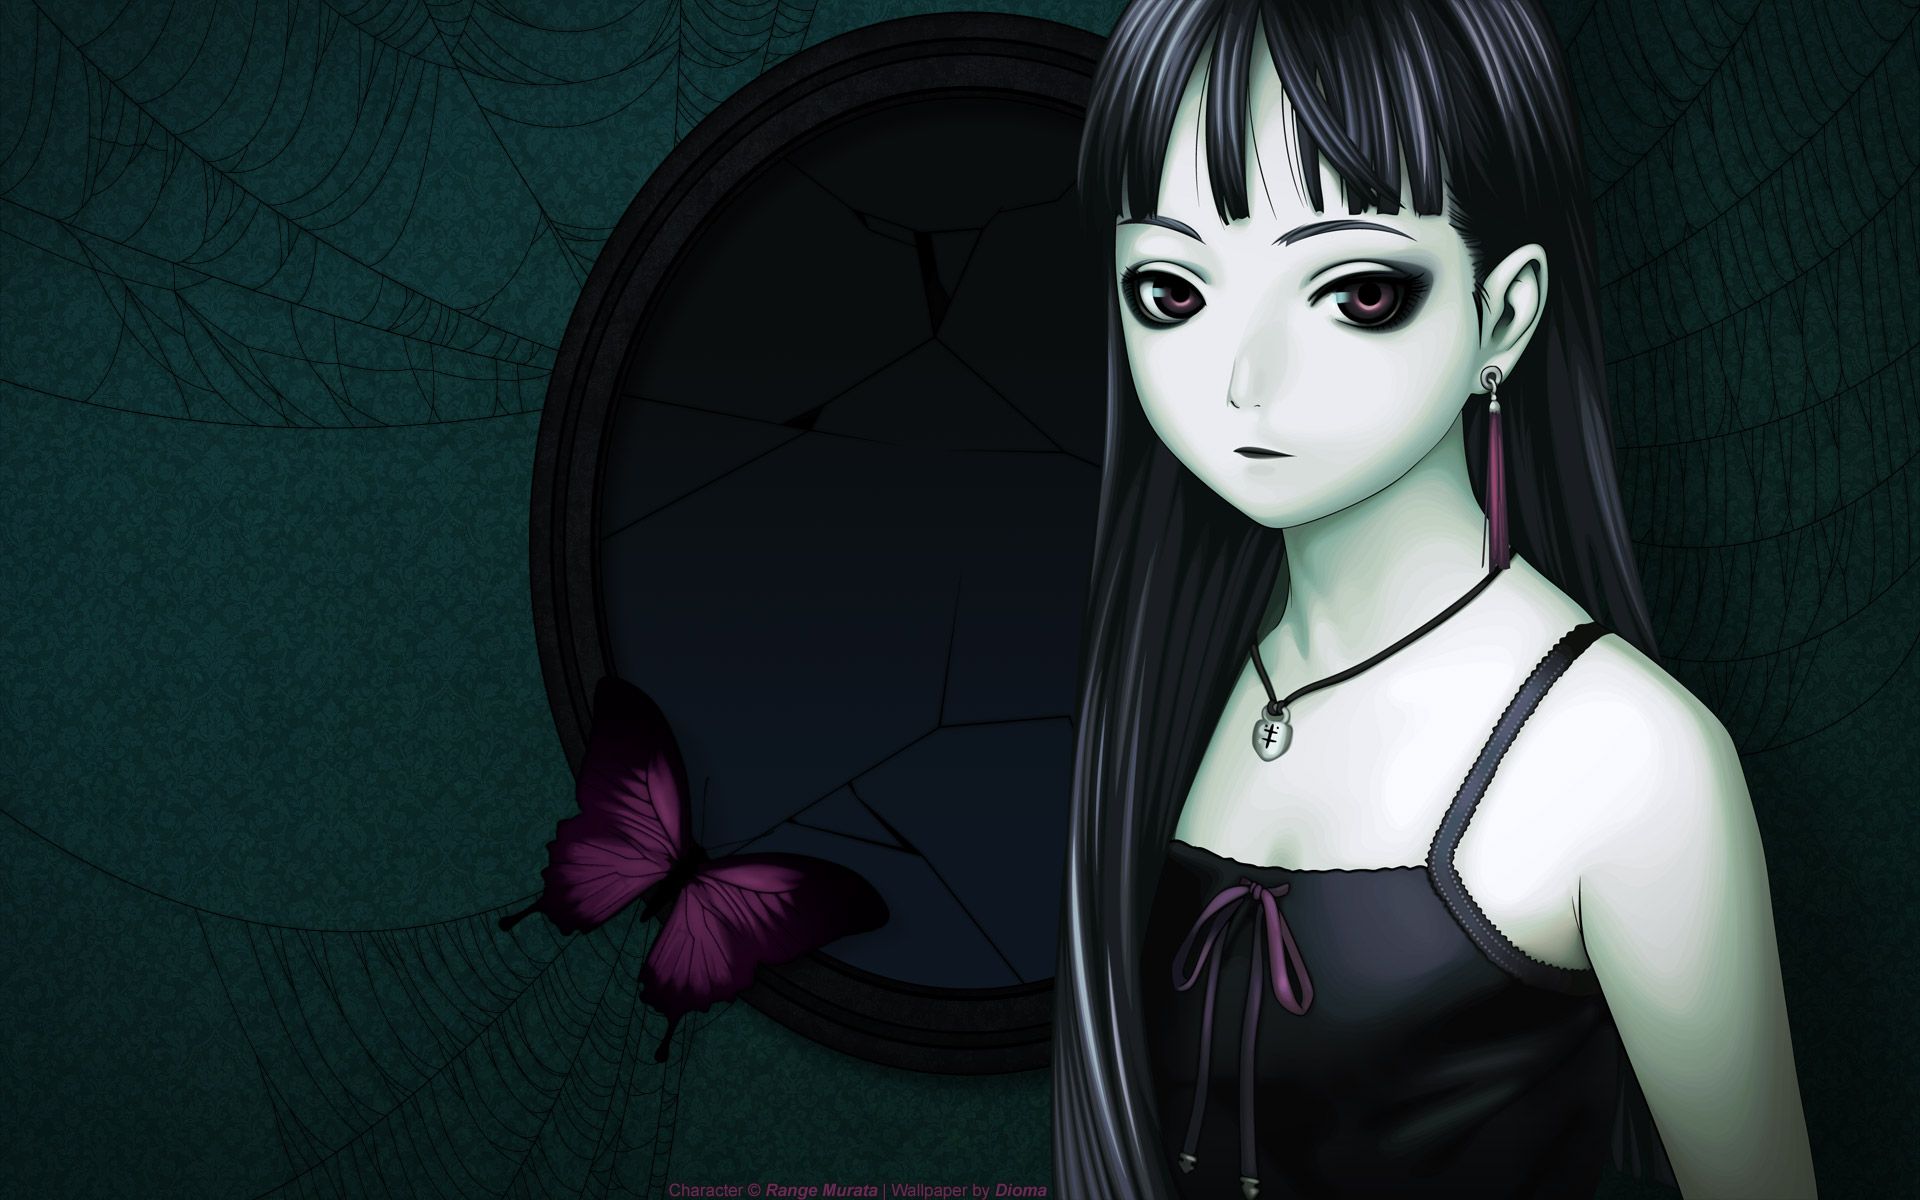 Download Anime Goth Girl Wallpaper 1920x1200 Full HD Backgrounds